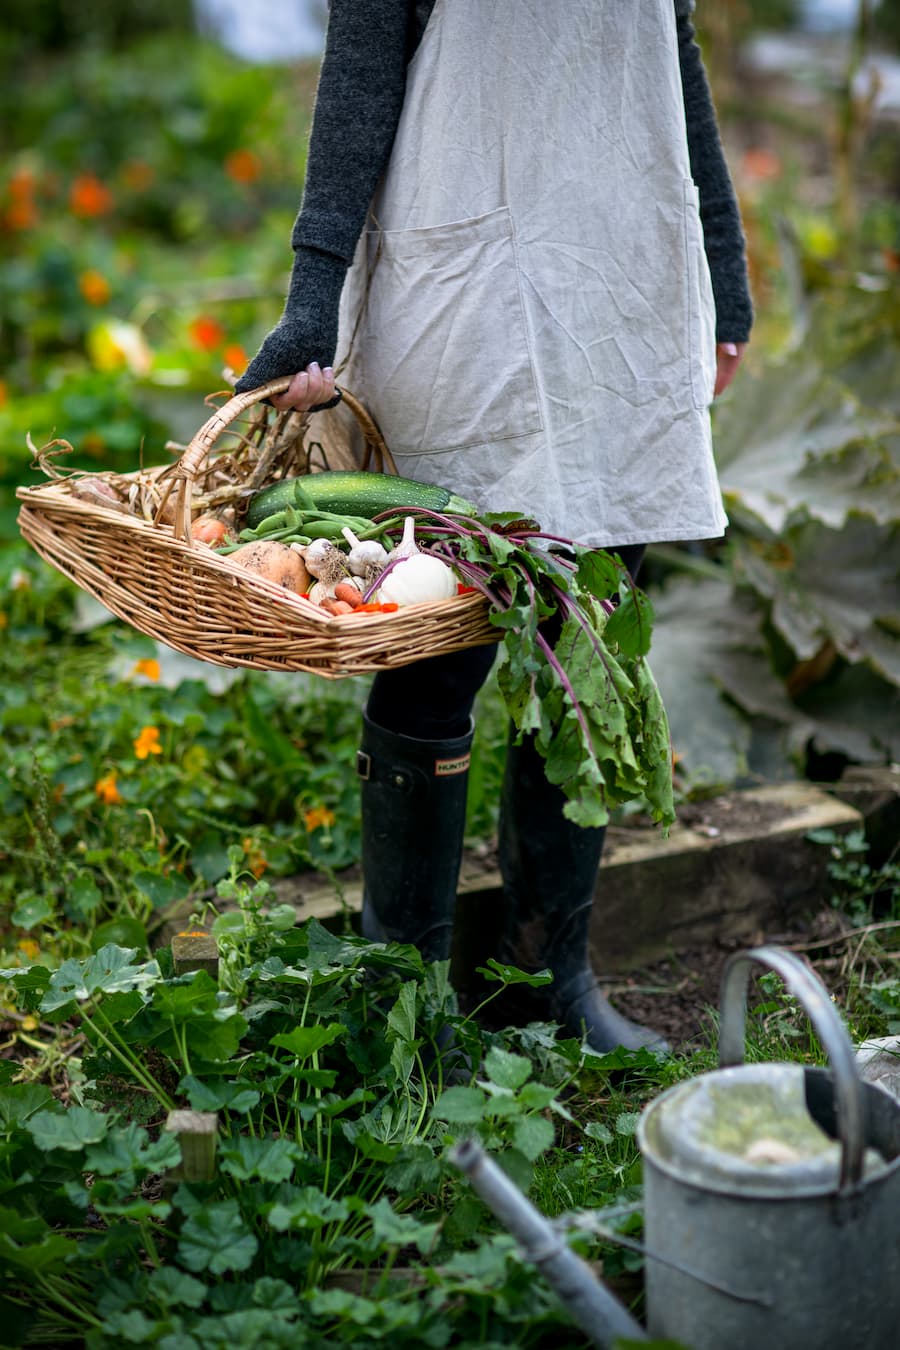 Woman with a linen apron holding a straw basket full of home-grown vegetables